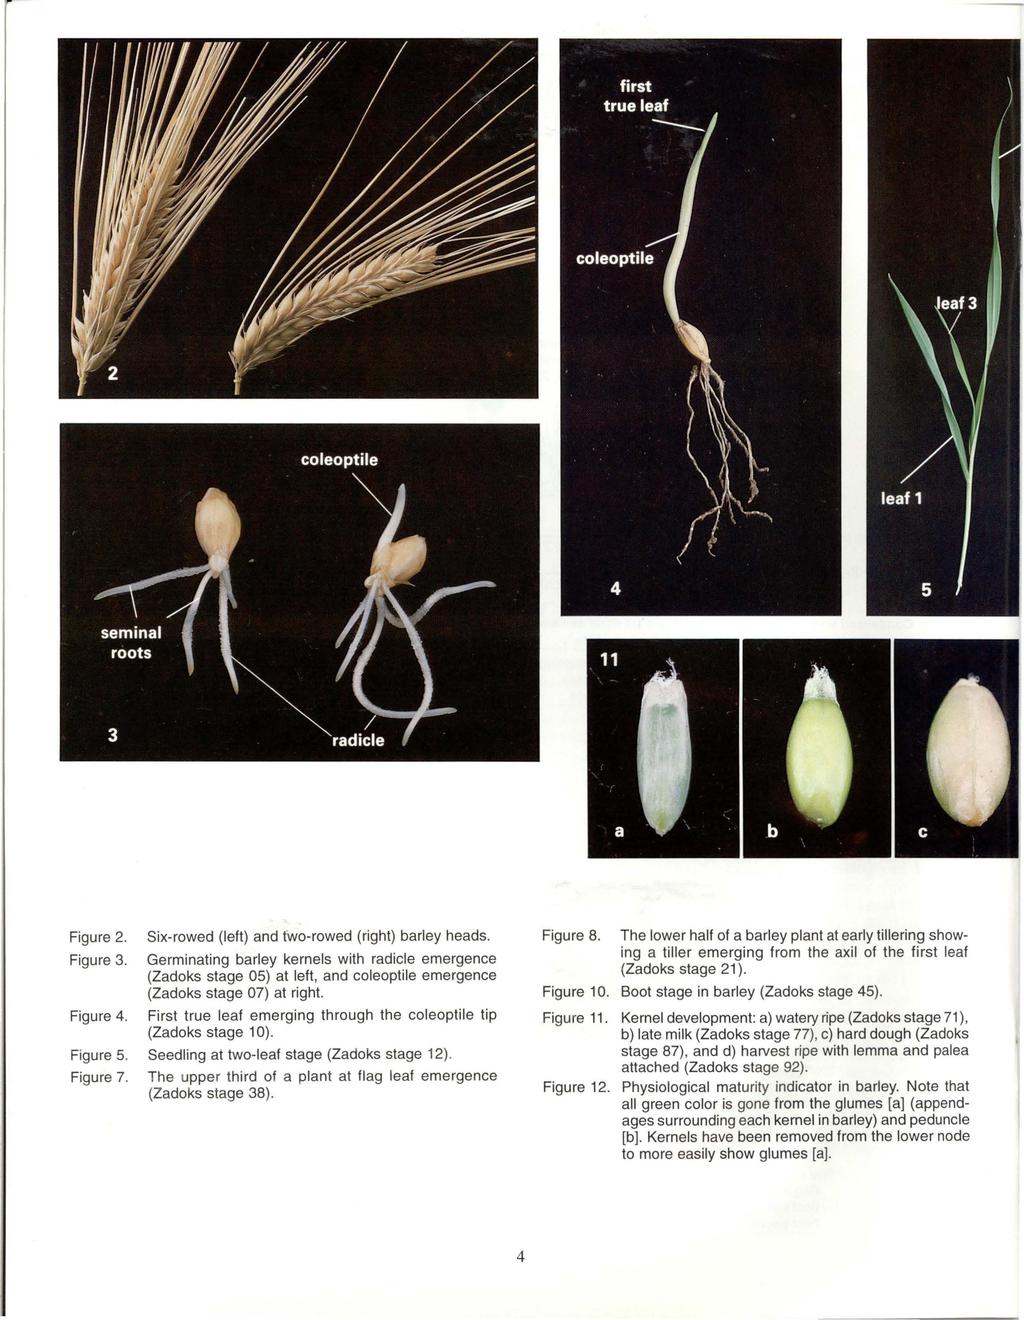 Figure 2. Figure 3. Figure 4. Six-rowed (left) and two-rowed (right) barley heads.